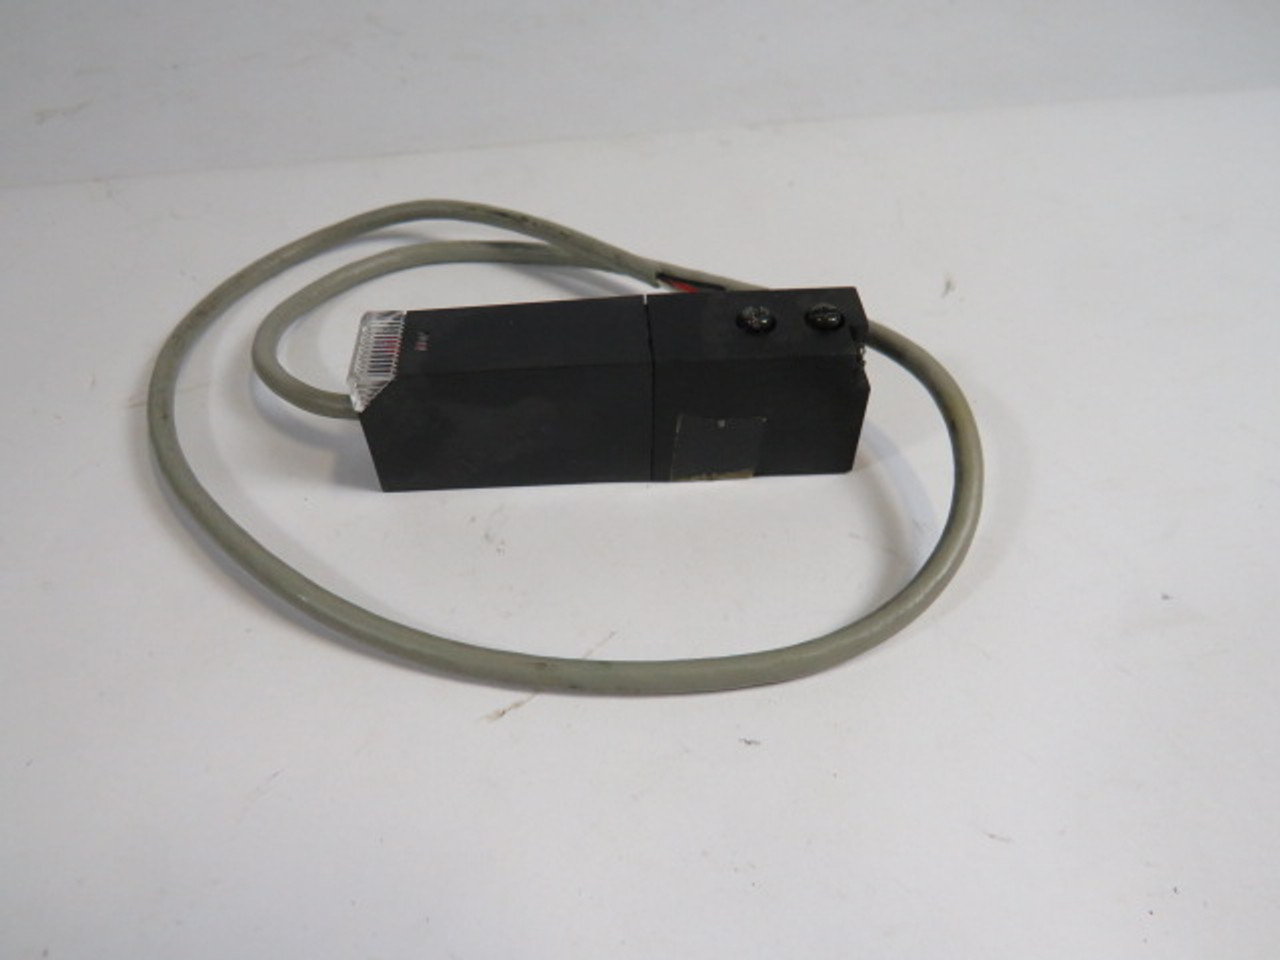 SMC ZSE1 Vacuum Switch Sup-Volt 12-24VDC Out 80mA 14.7 PSI USED